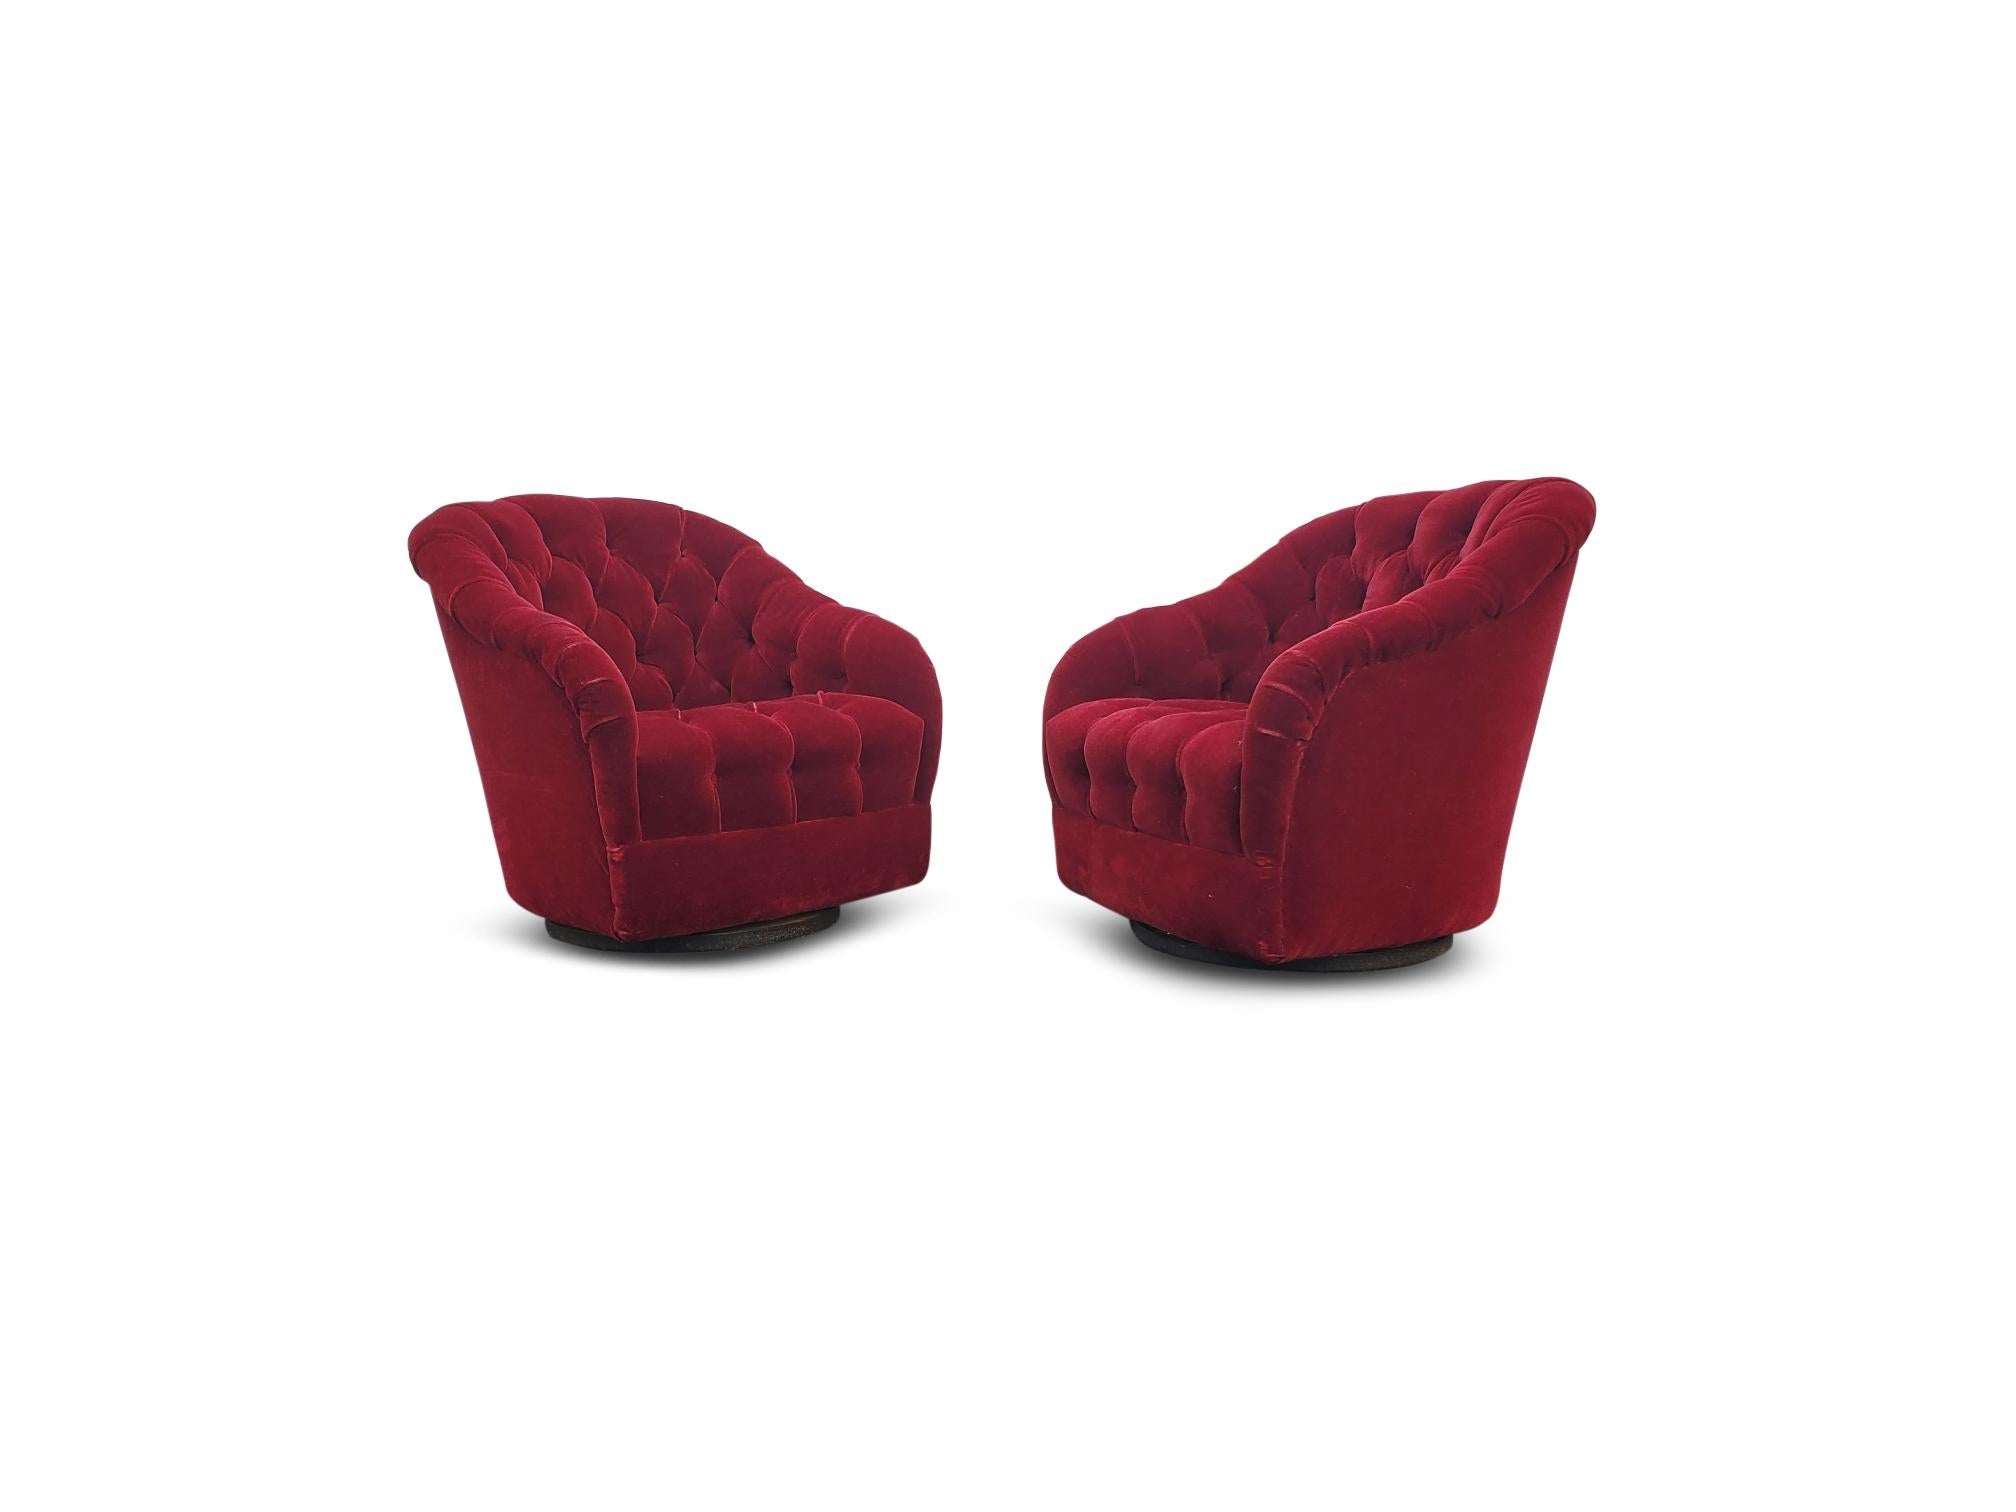 Pair of Ward Bennett Tufted Swivel Lounge Chairs   For Sale 4